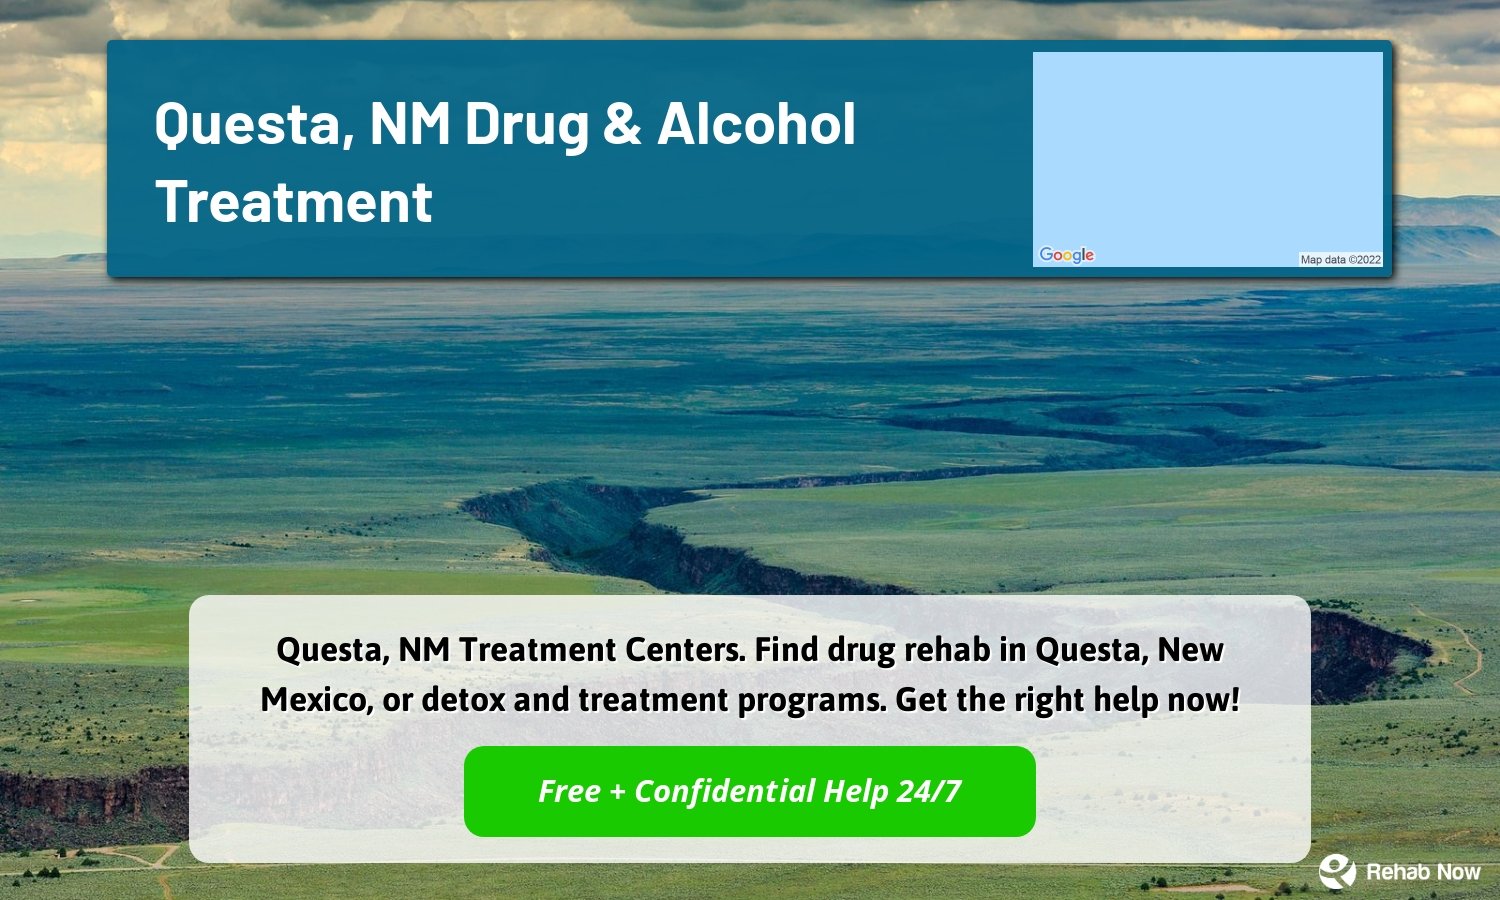 Questa, NM Treatment Centers. Find drug rehab in Questa, New Mexico, or detox and treatment programs. Get the right help now!